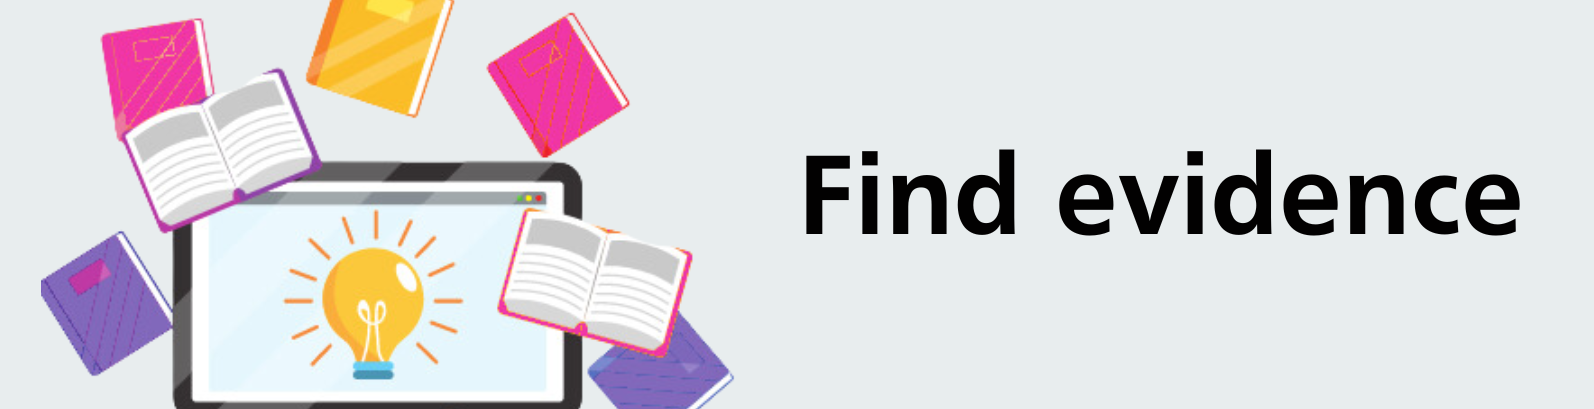 Left handside flat icon image of laptop with books floating around it, right hand side text says 'Find Evidence'